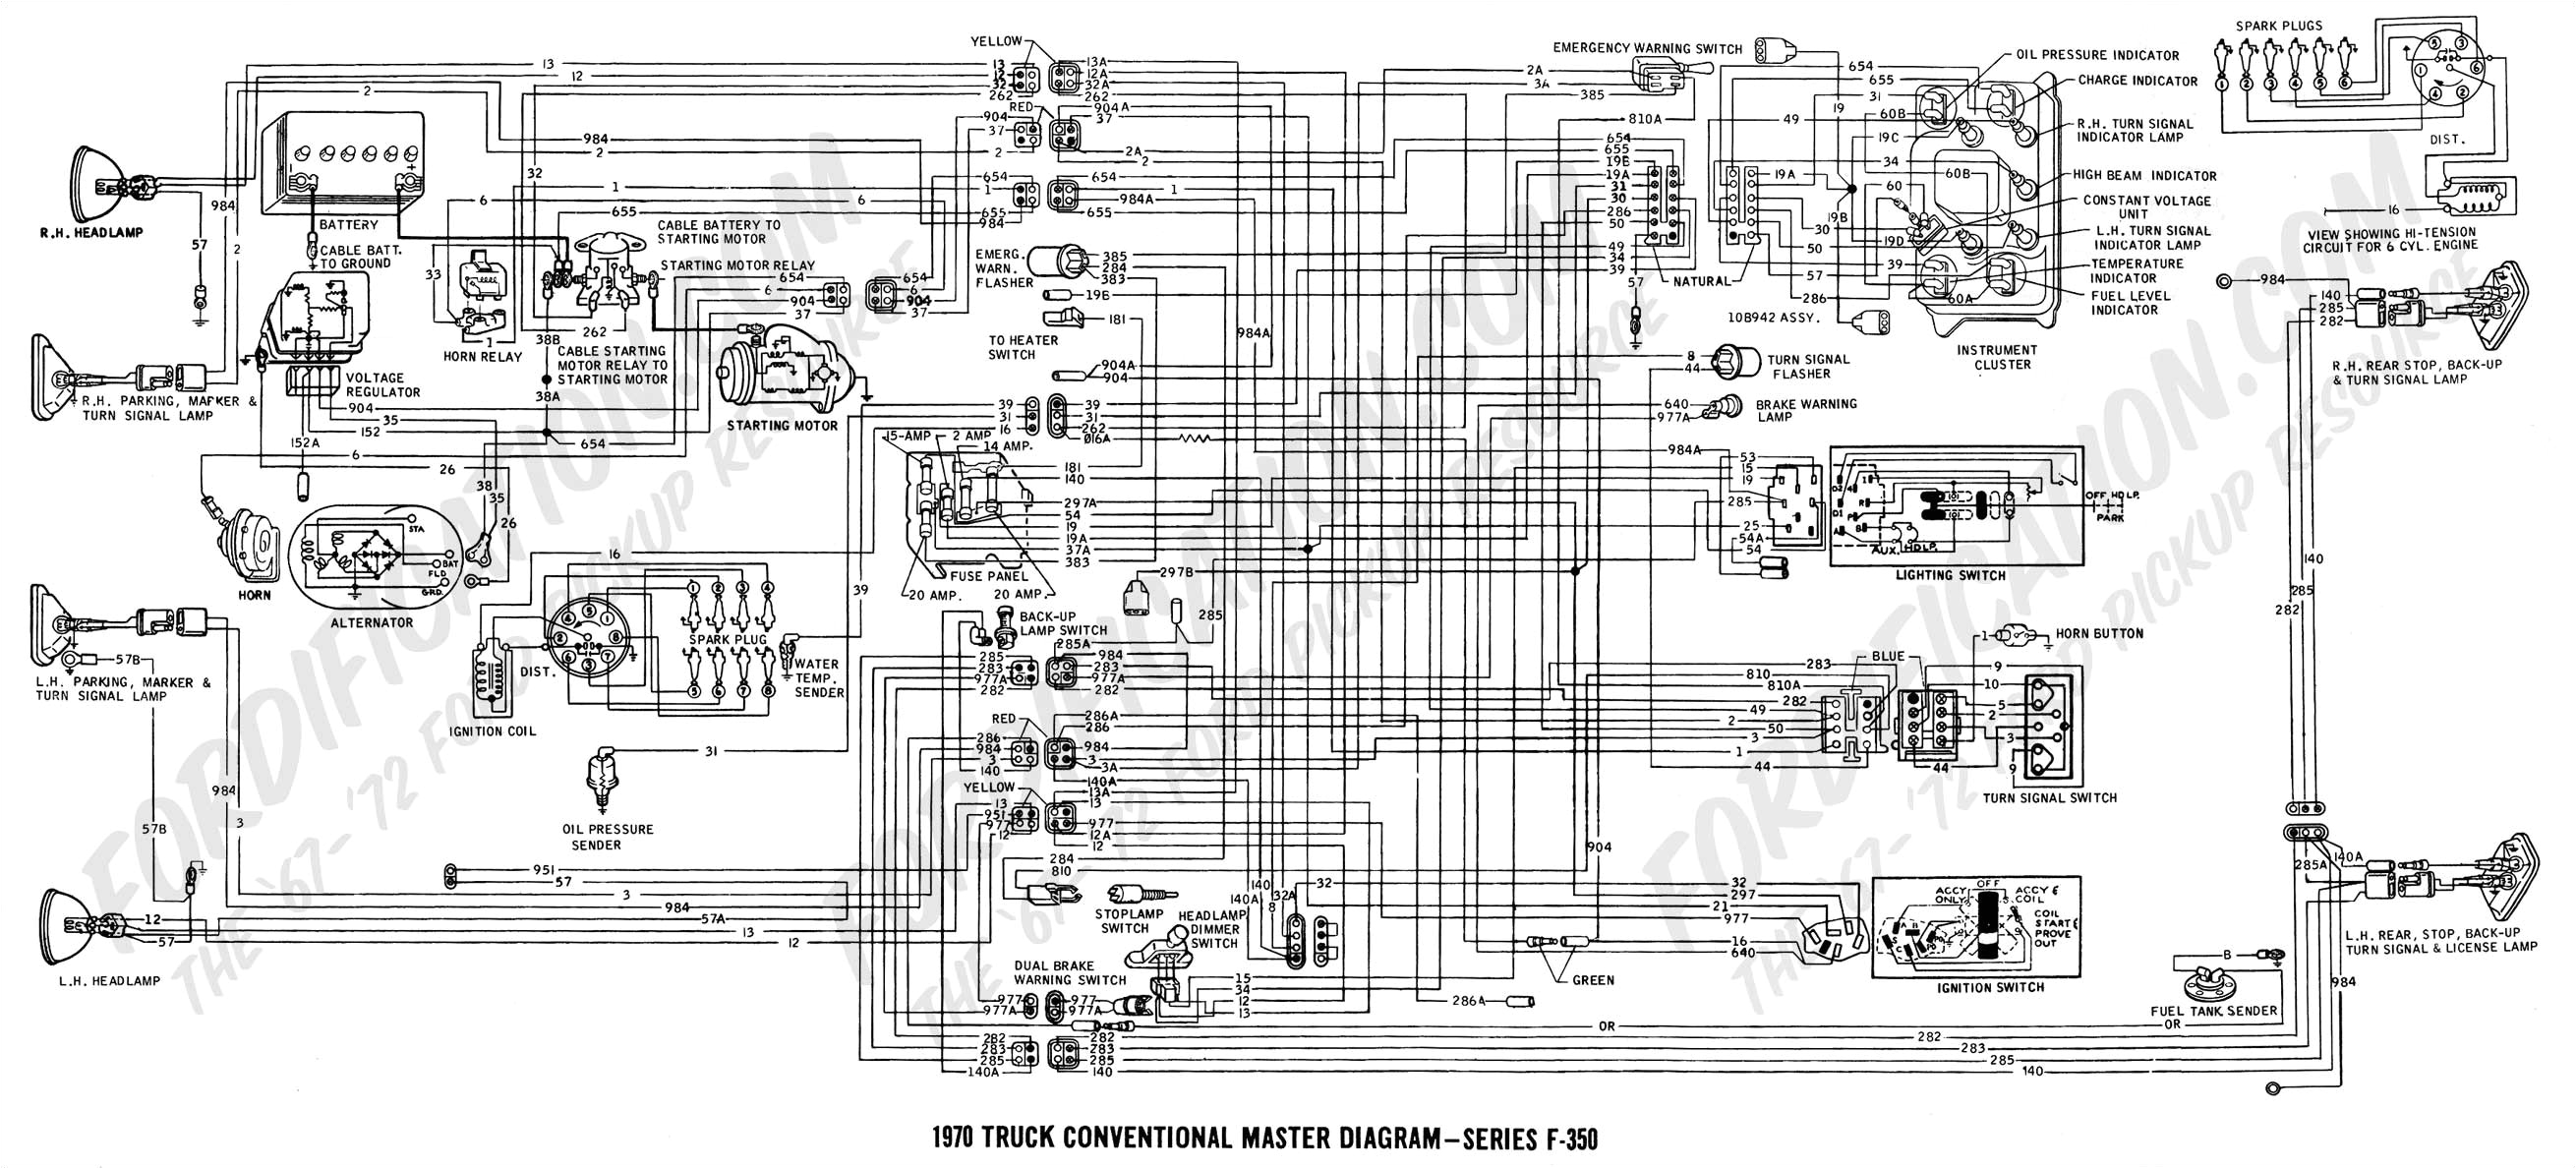 2005 ford escape wiring harness diagram inspirational trailer wiring harness schematic download of 2005 ford escape wiring harness diagram 1 jpg